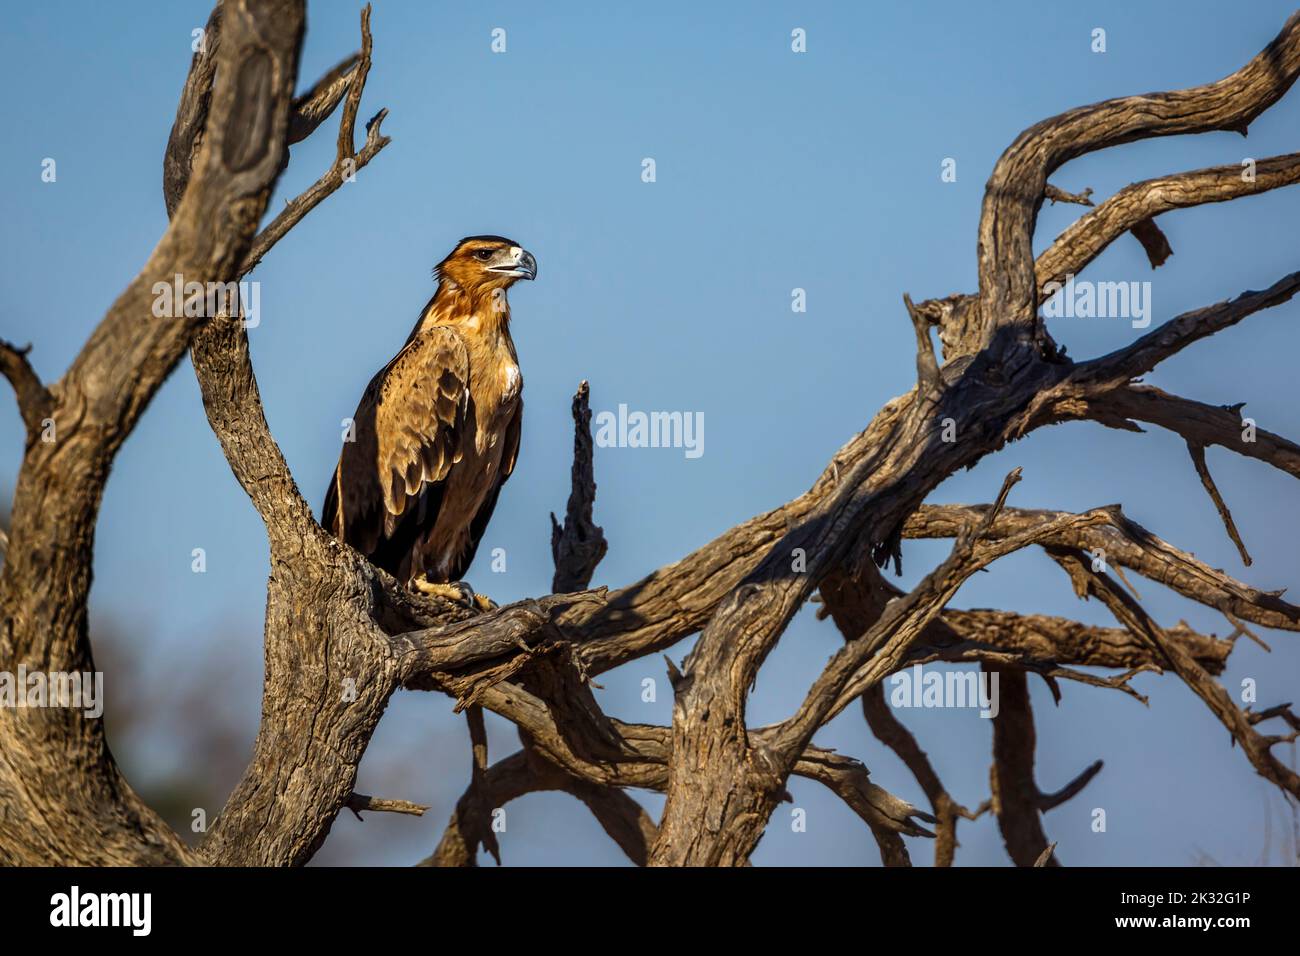 Tawny Eagle standing on a log in Kgalagadi transfrontier park, South Africa ; Specie Aquila rapax family of Accipitridae Stock Photo